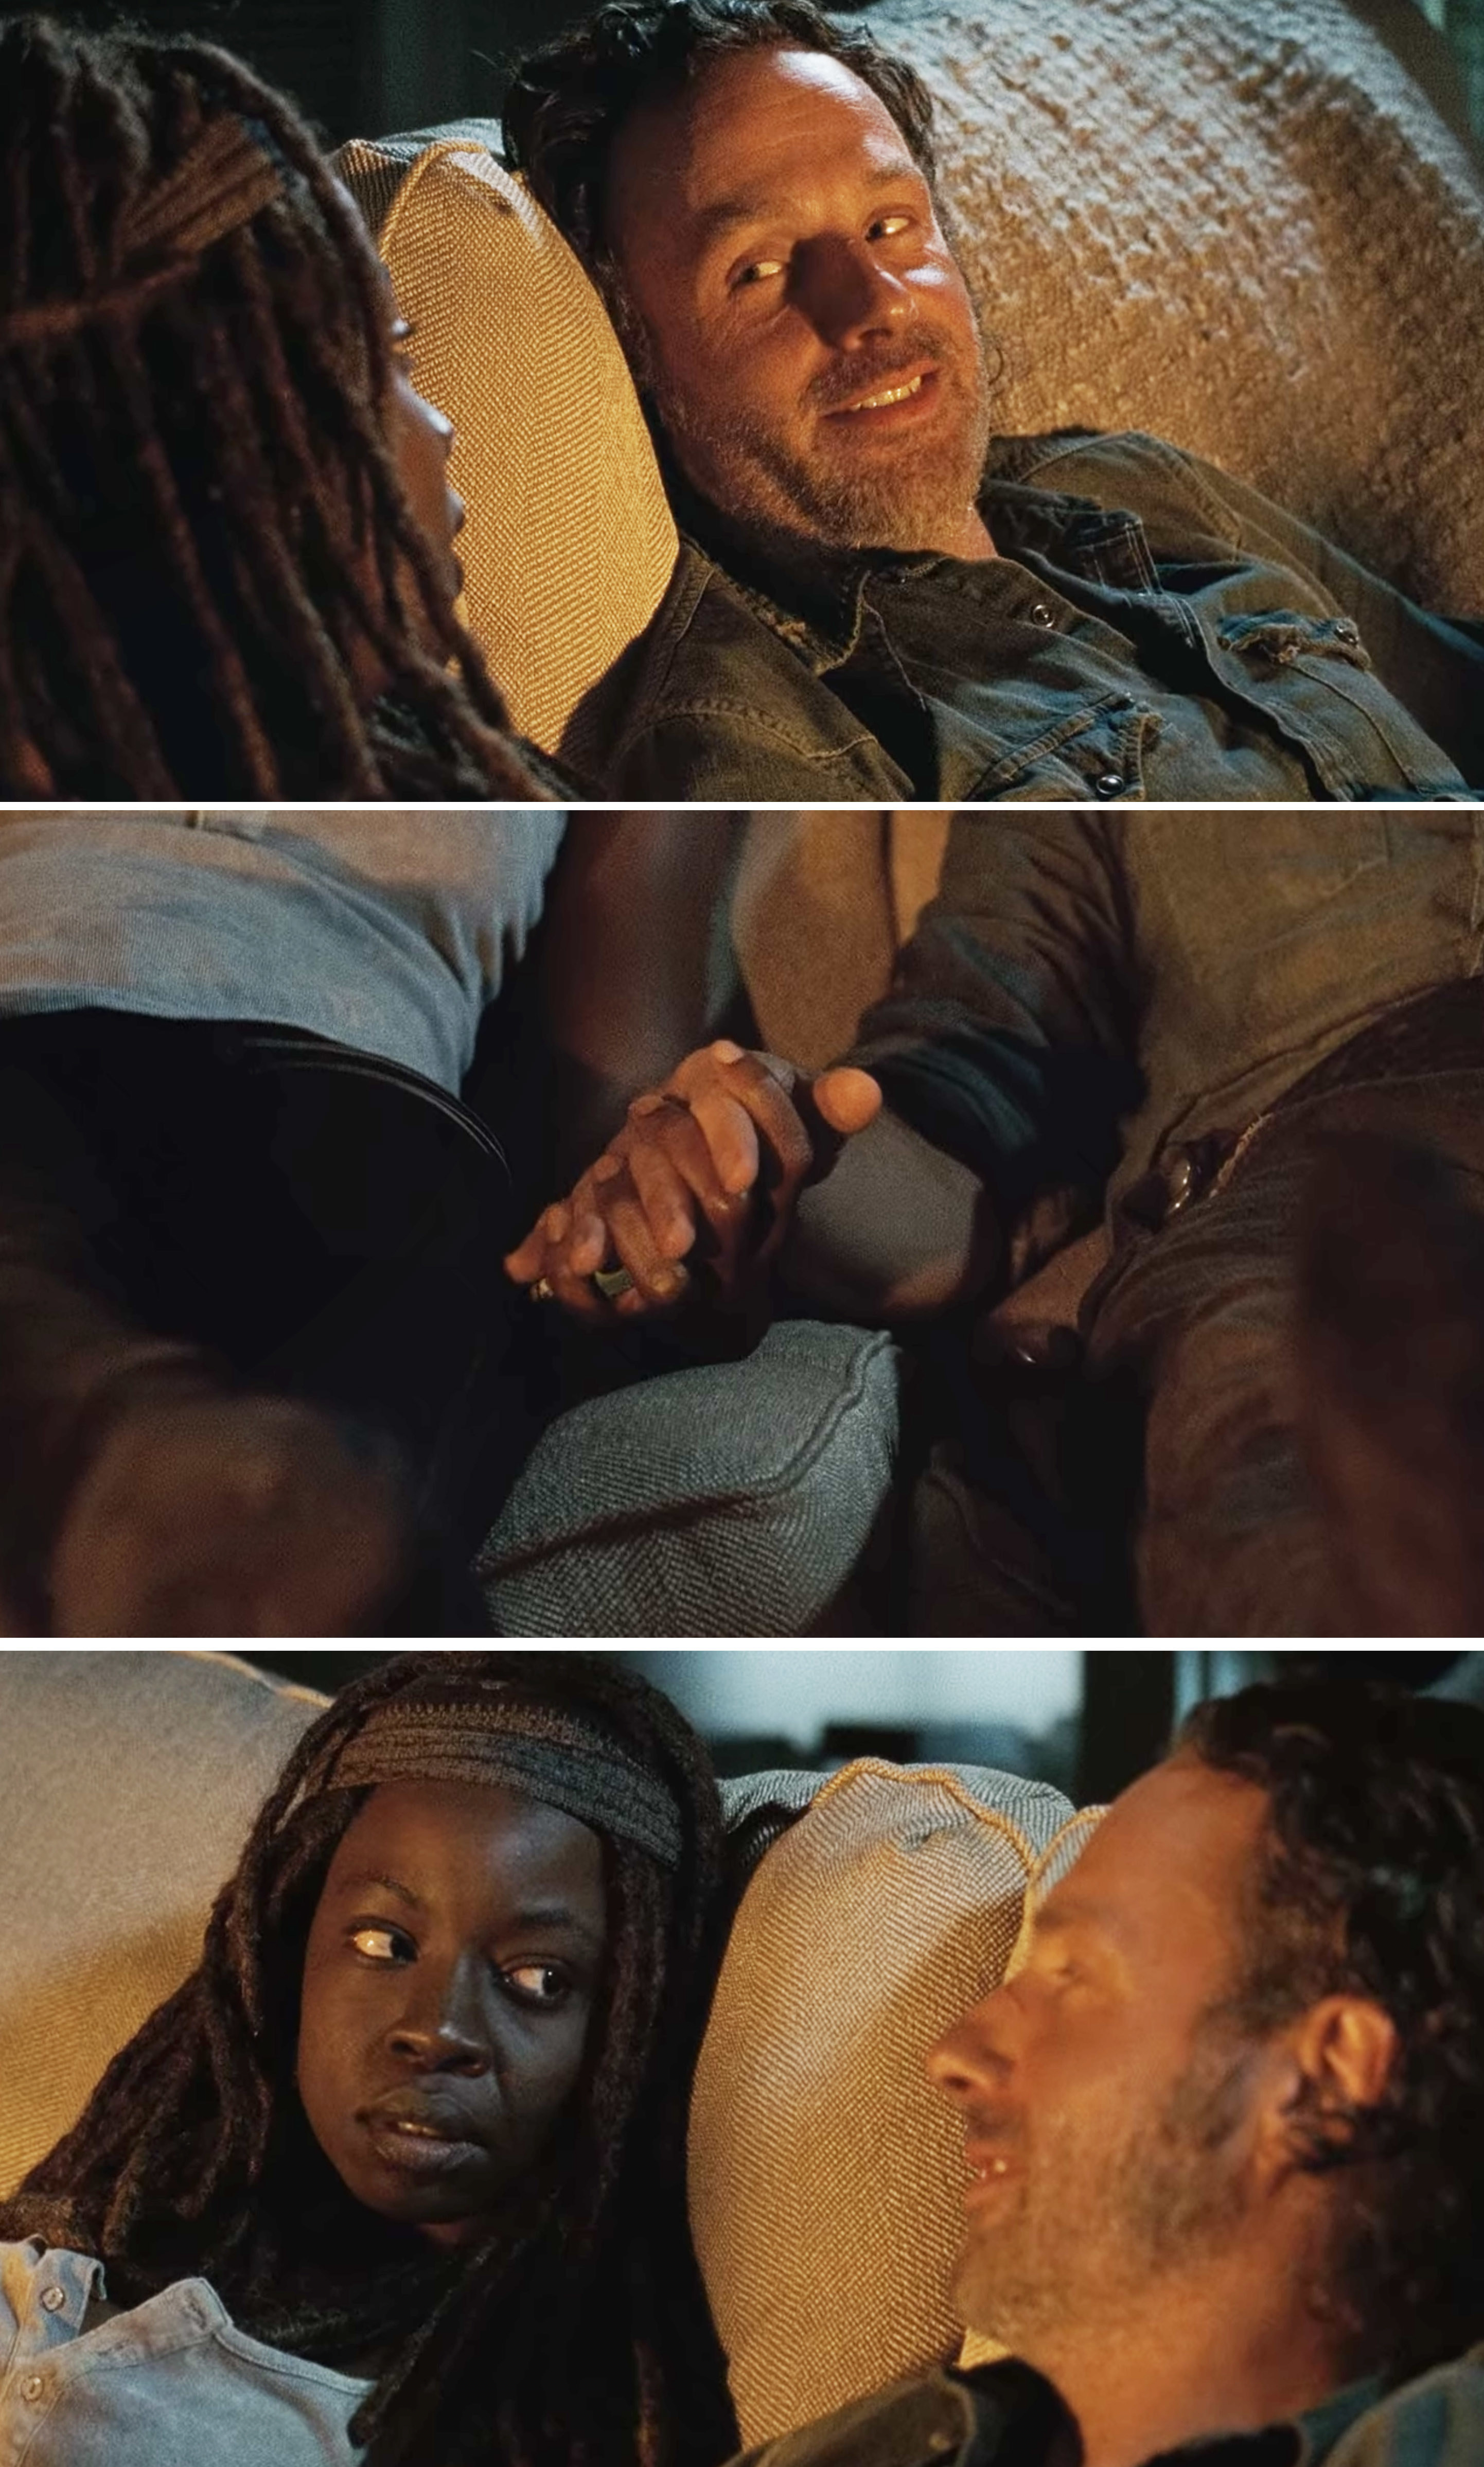 Michonne and Rick holding hands and looking at each other